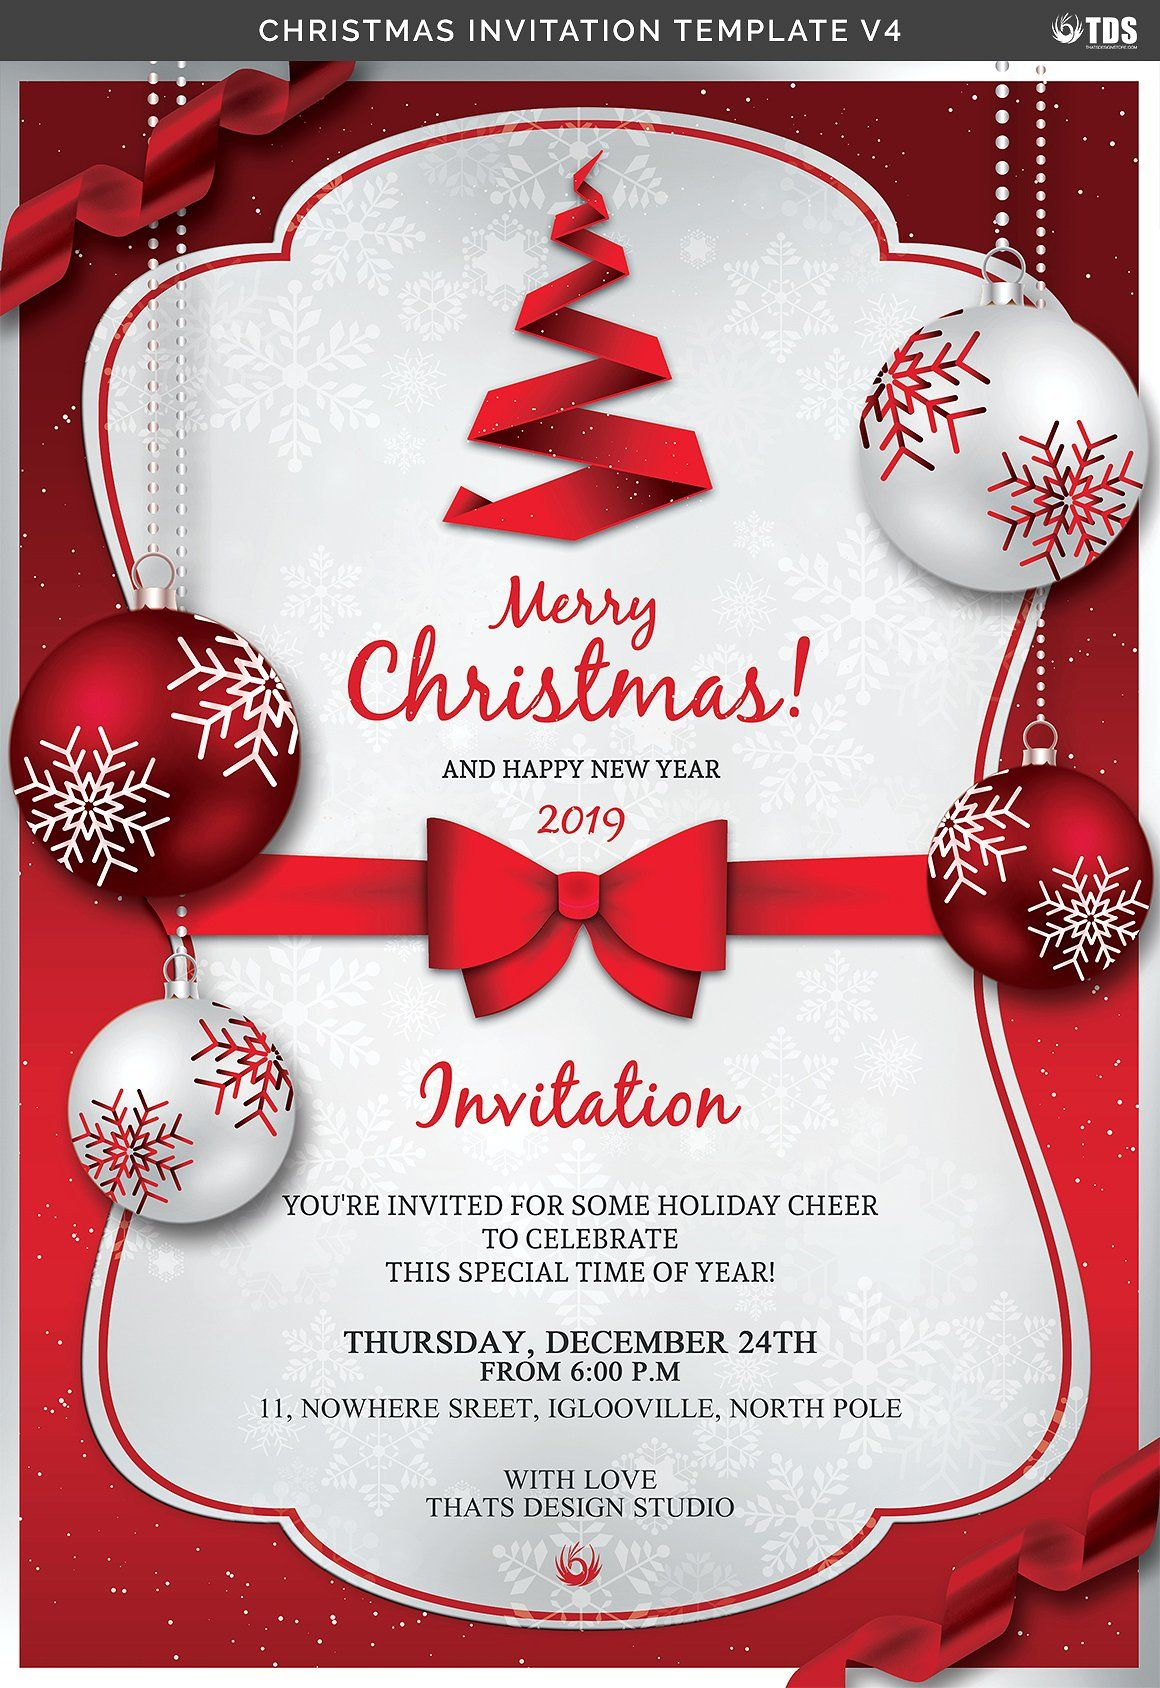 Christmas Invitation Template V4 Thats Design Store On inside size 1160 X 1688